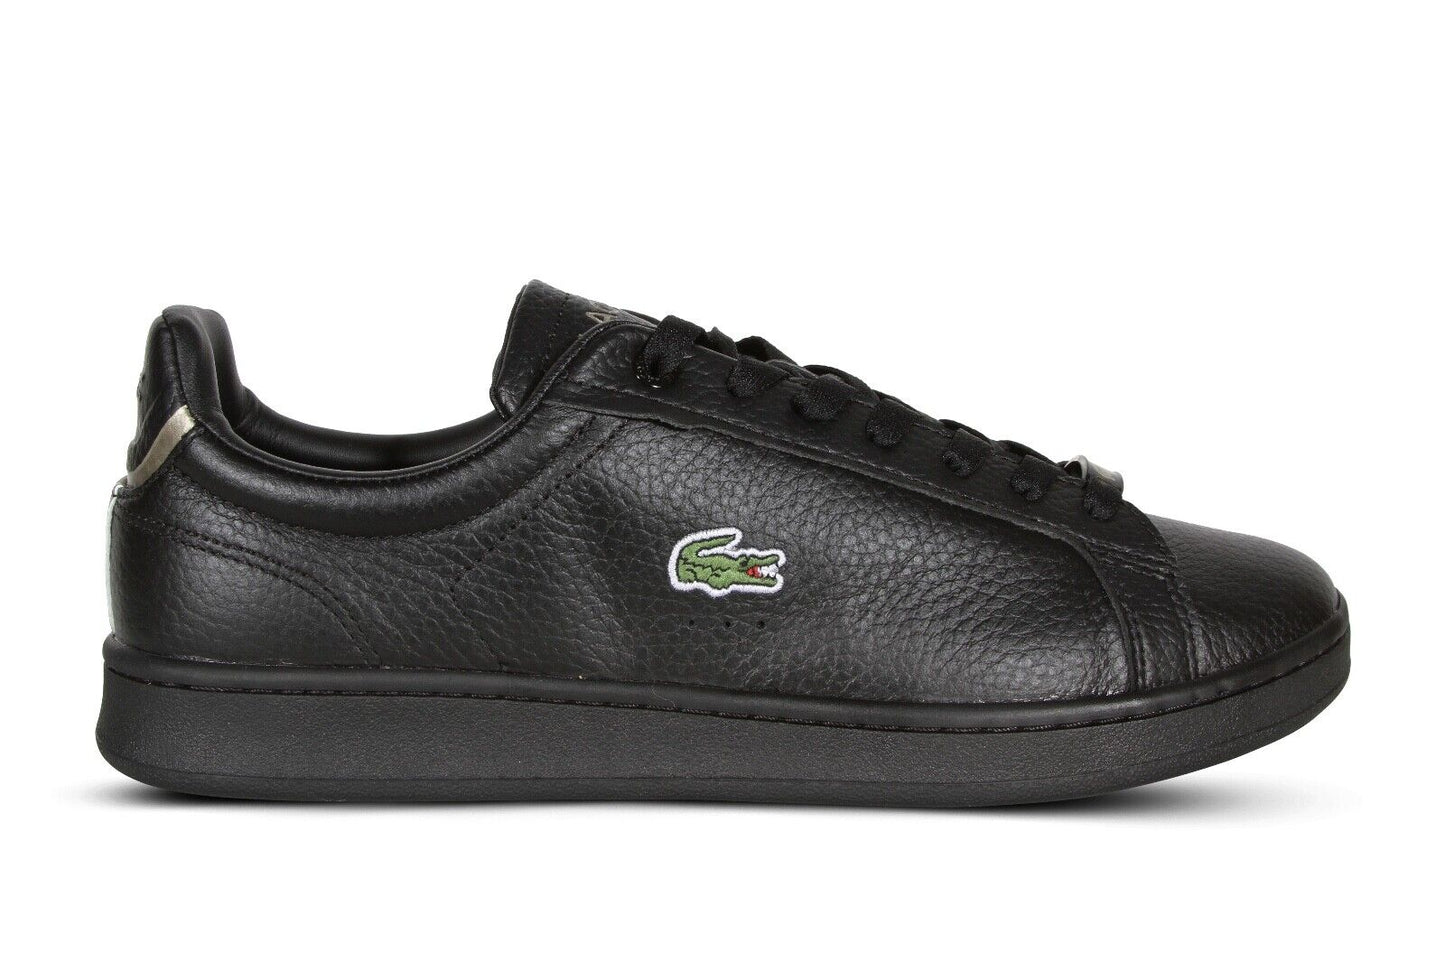 Lacoste Carnaby Pro 123 3 SMA Men's Sneakers in Black 745SMA011302H